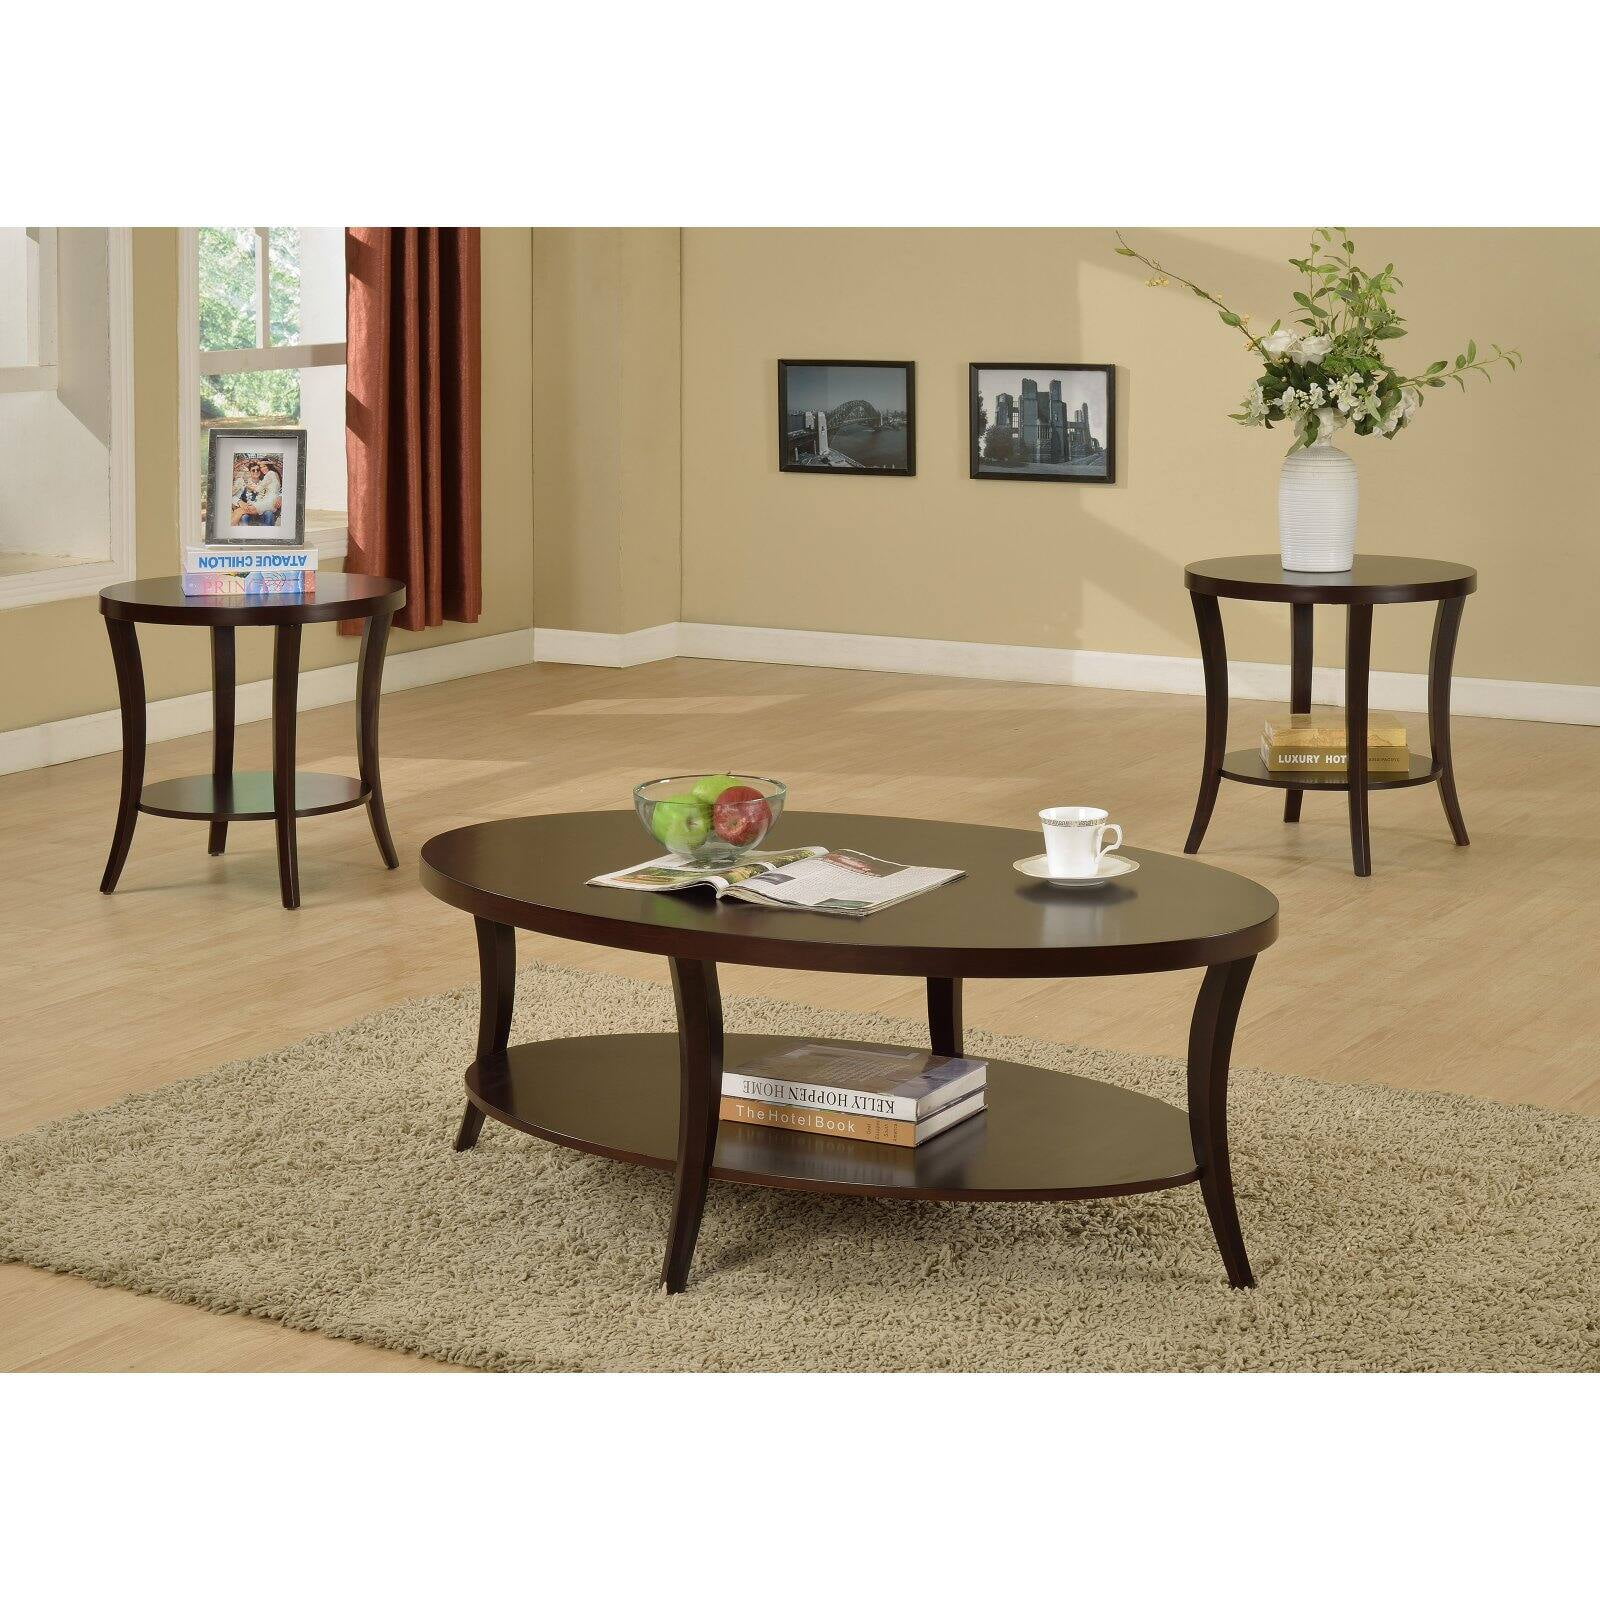 Impressive pictures of end tables Roundhill Perth 3 Piece Espresso Oval Coffee Table With End Tables Set Walmart Com